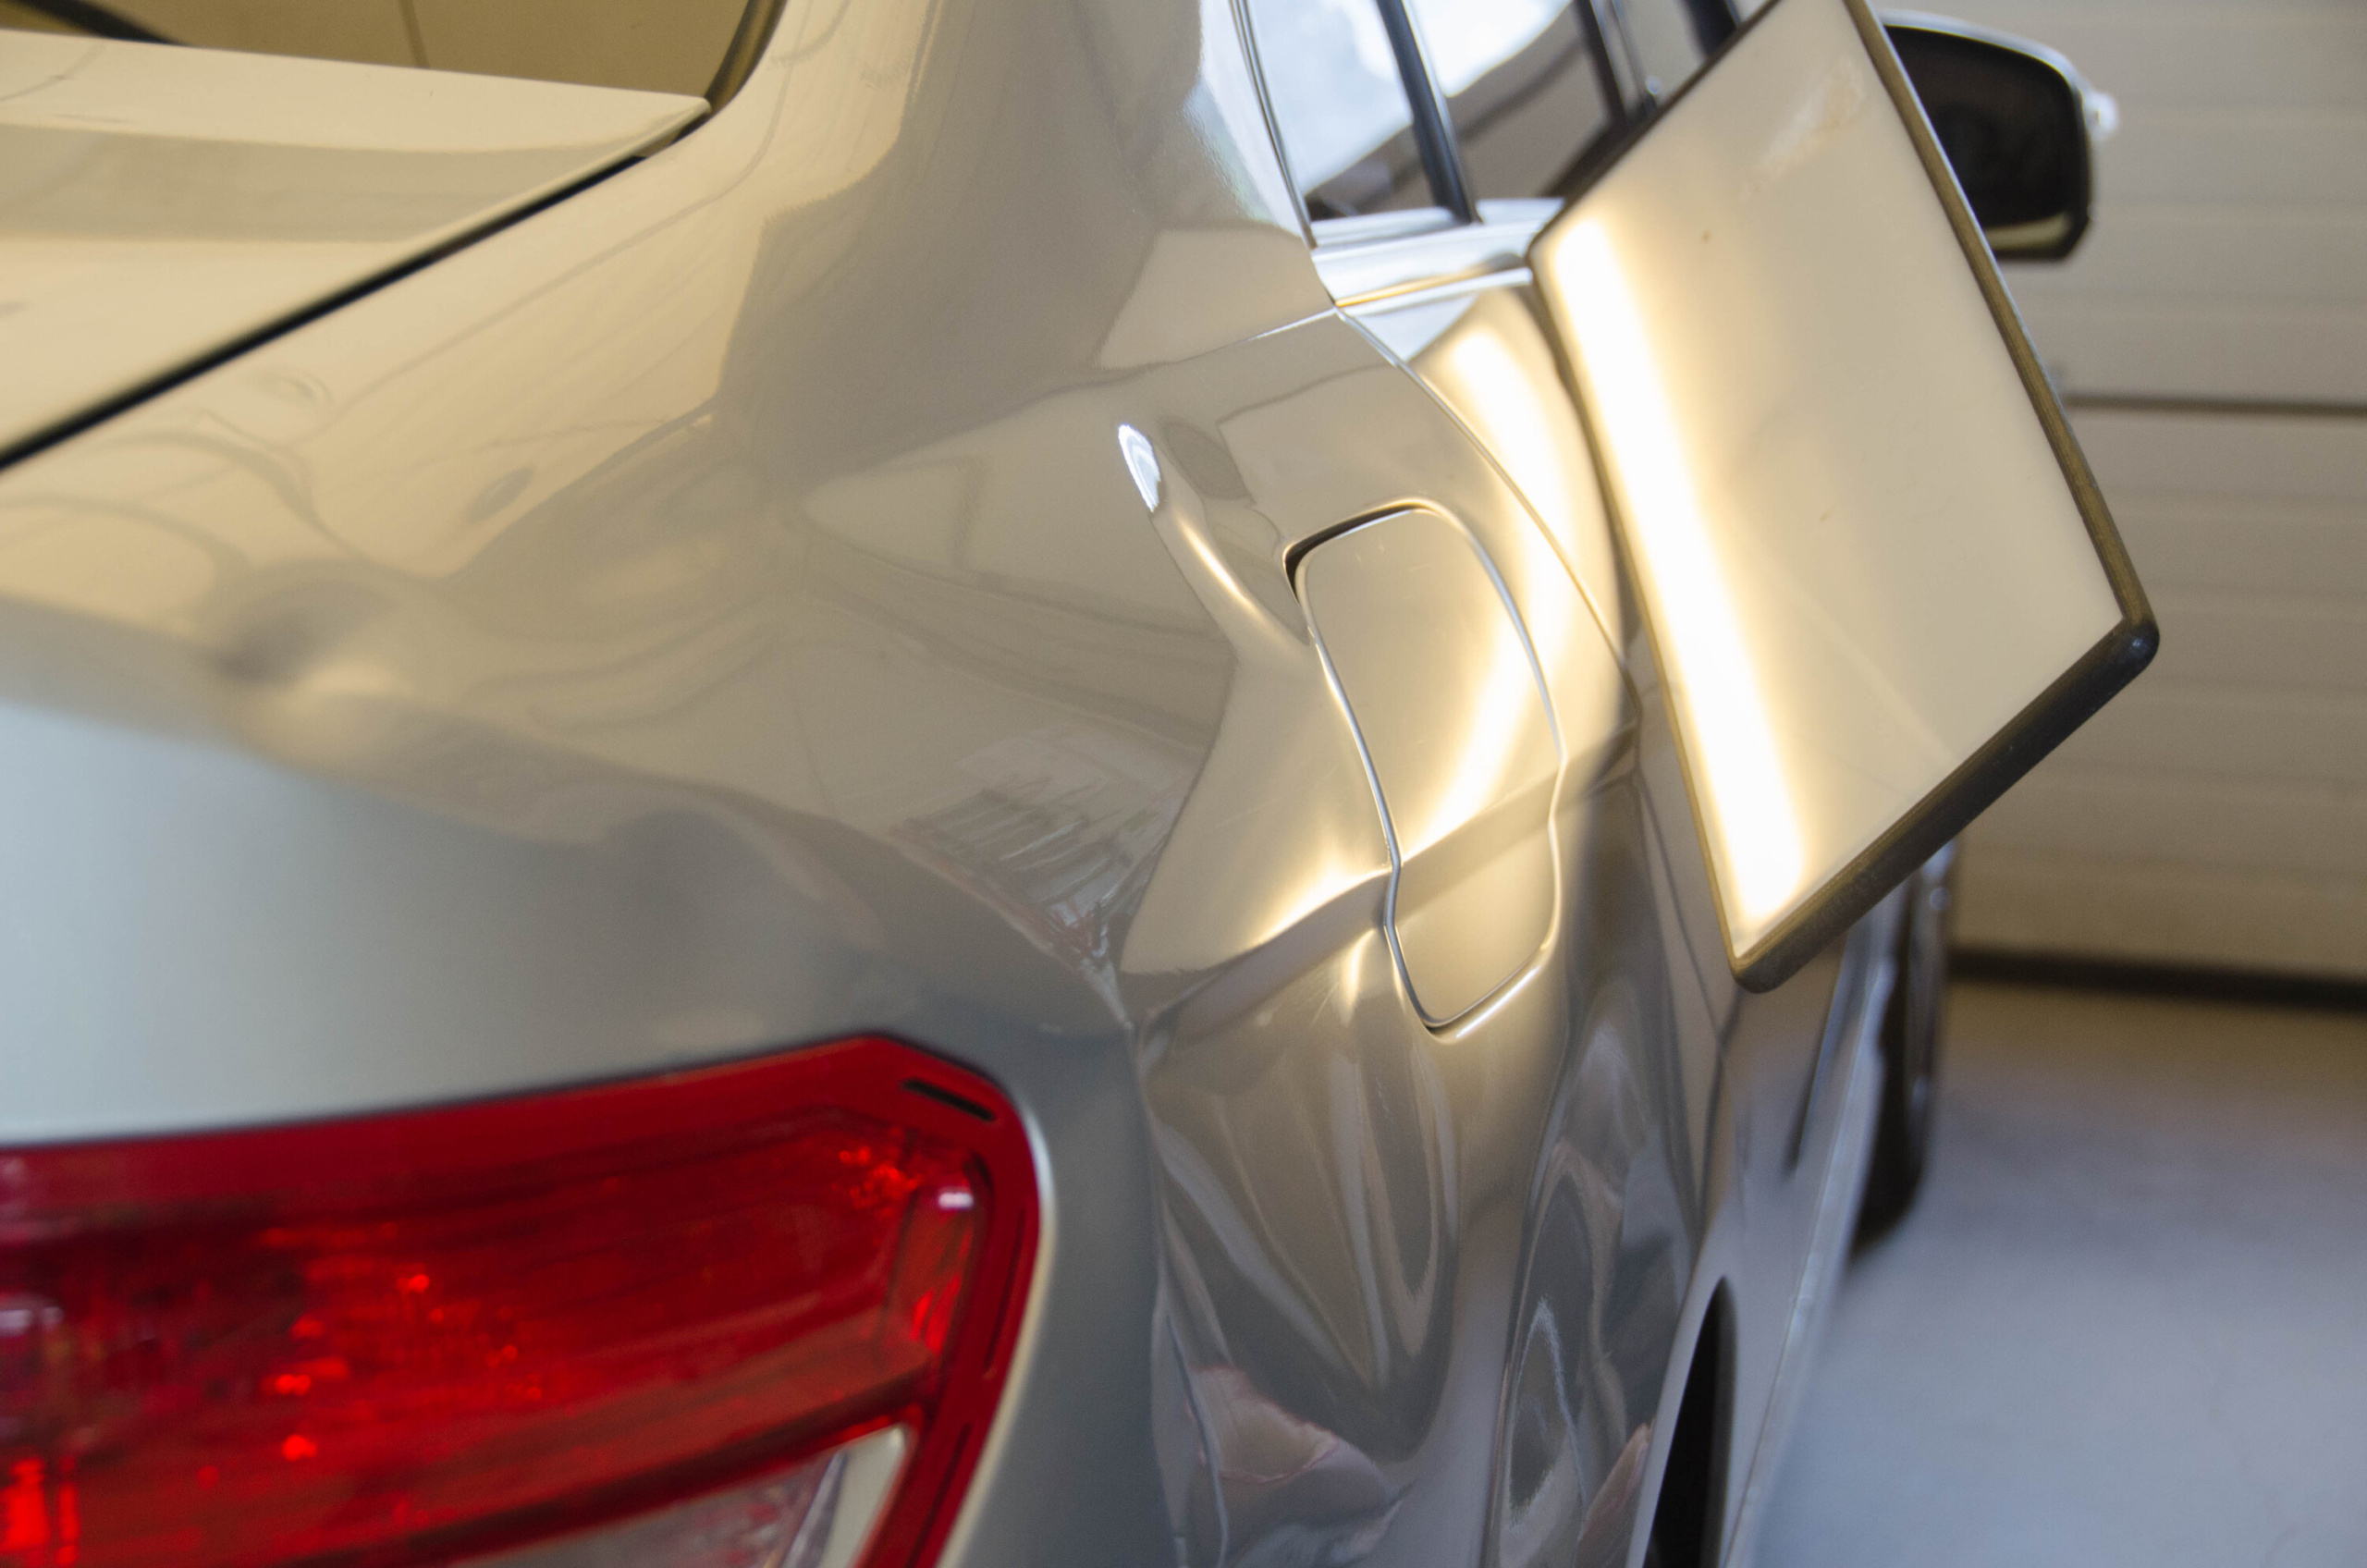 Frequently Asked Questions About Paintless Dent Removal